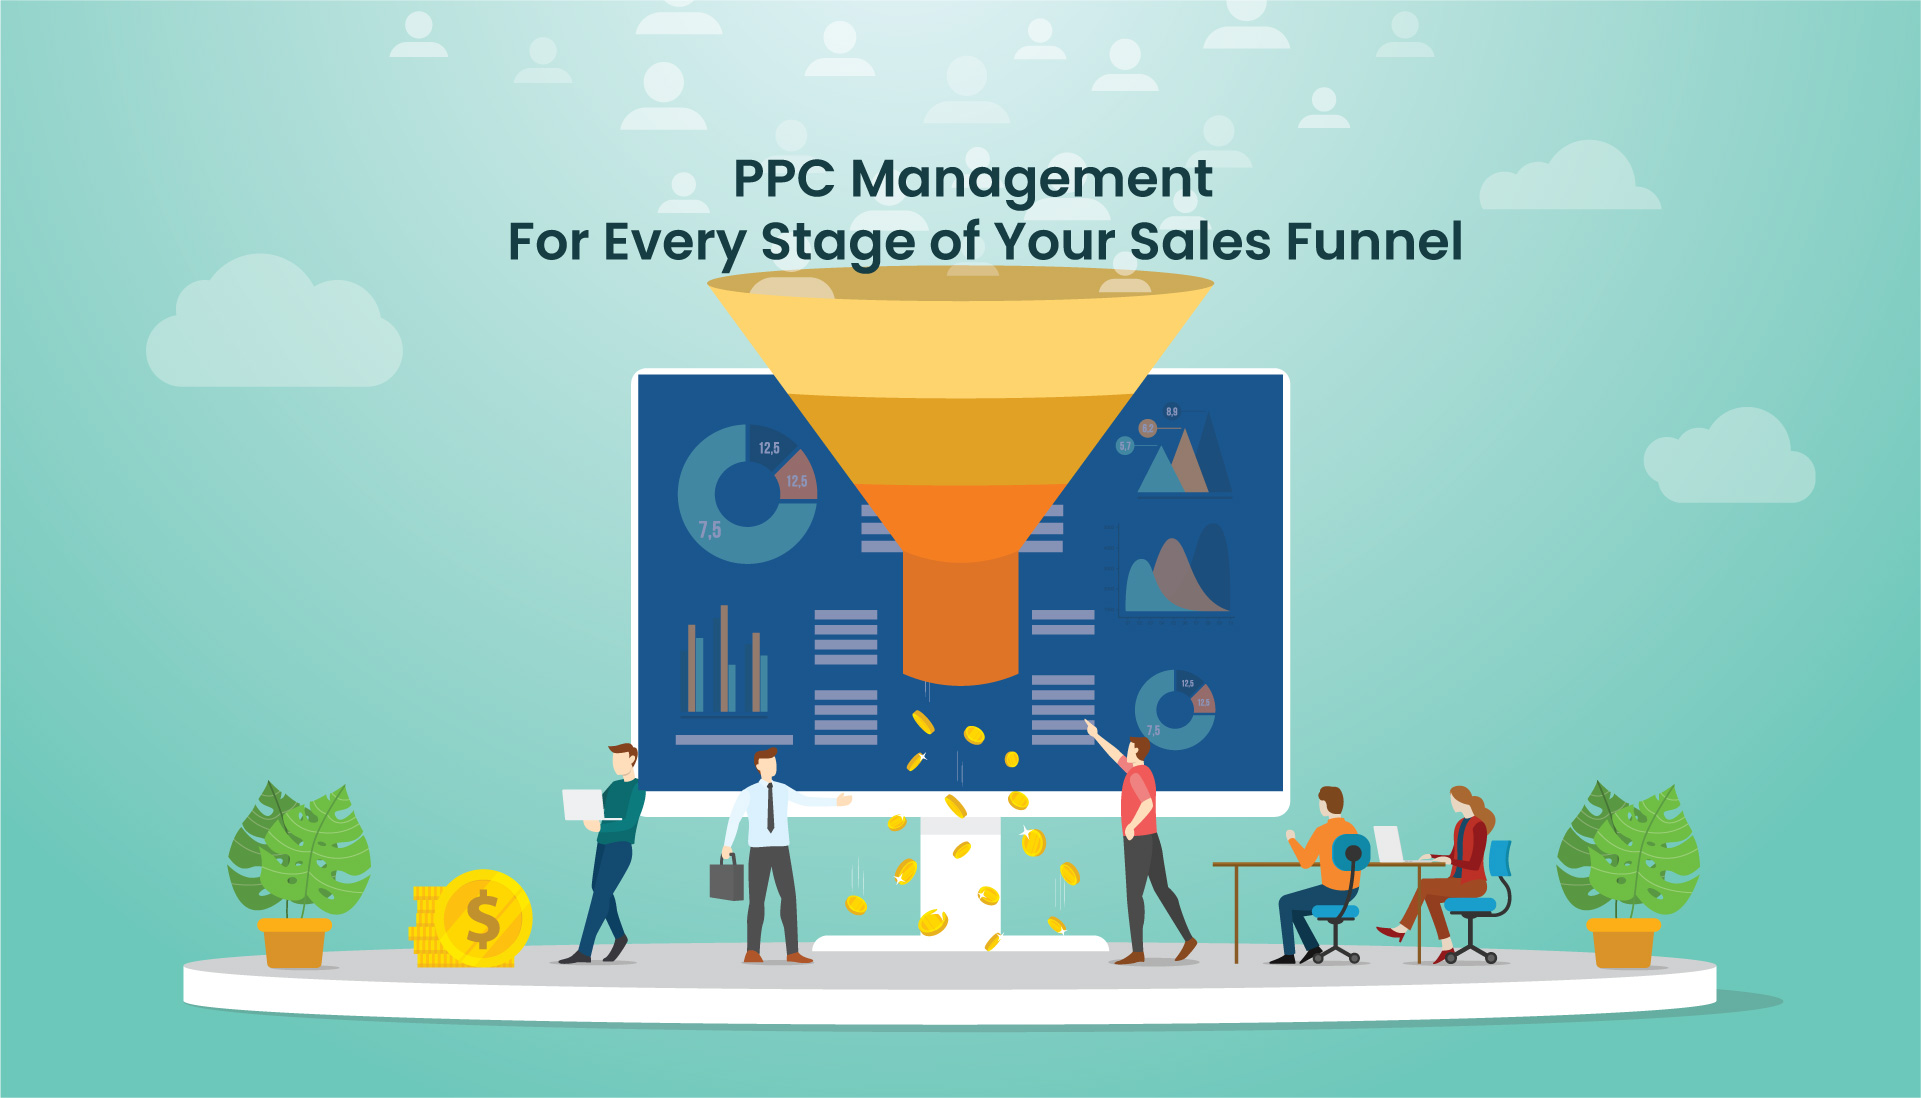 PPC management strategies and ad types to enhance sales funnel